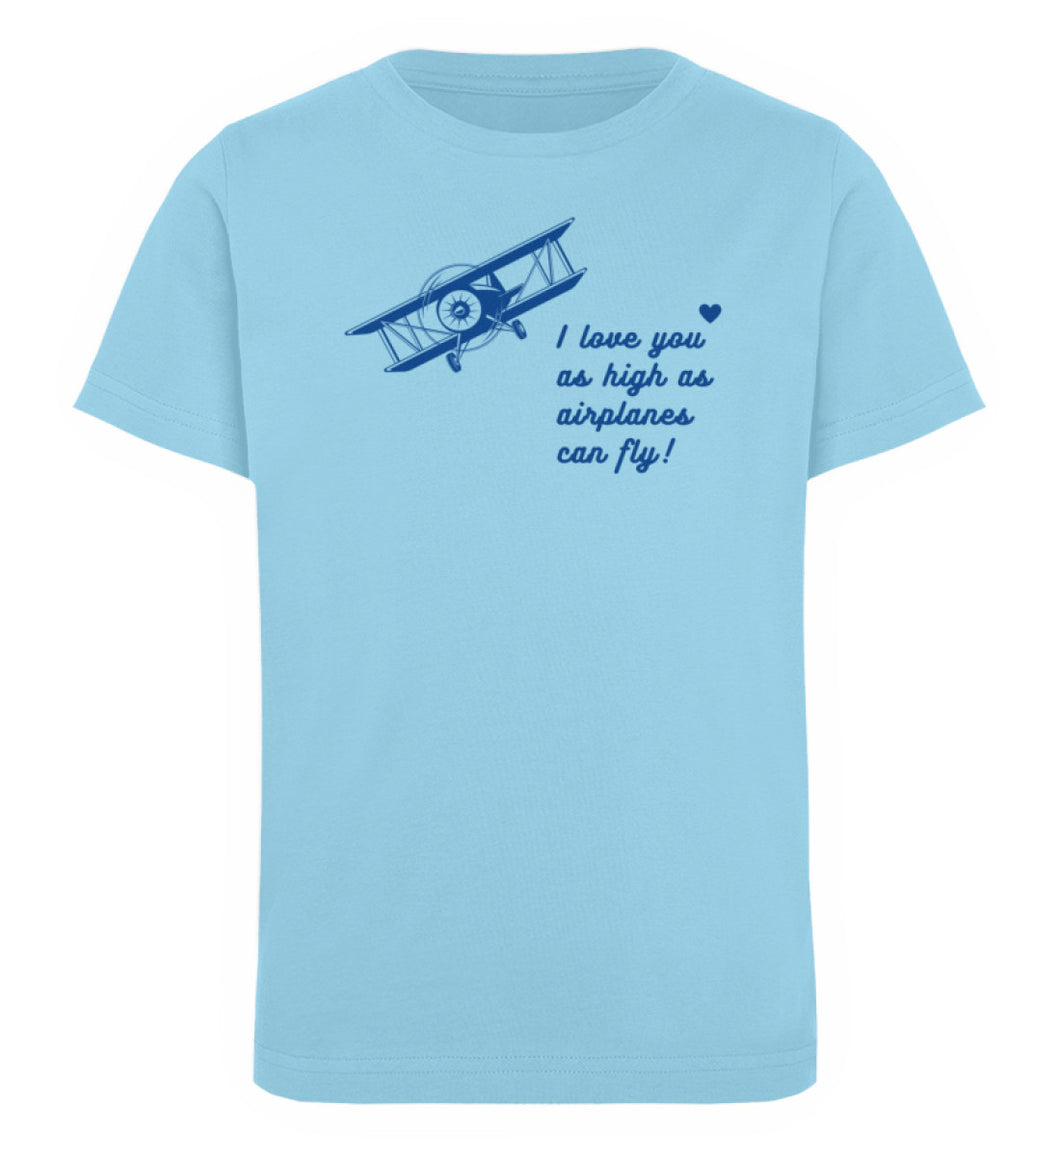 I love you as high as airplanes can fly! - Flight Kids T-Shirt Bio